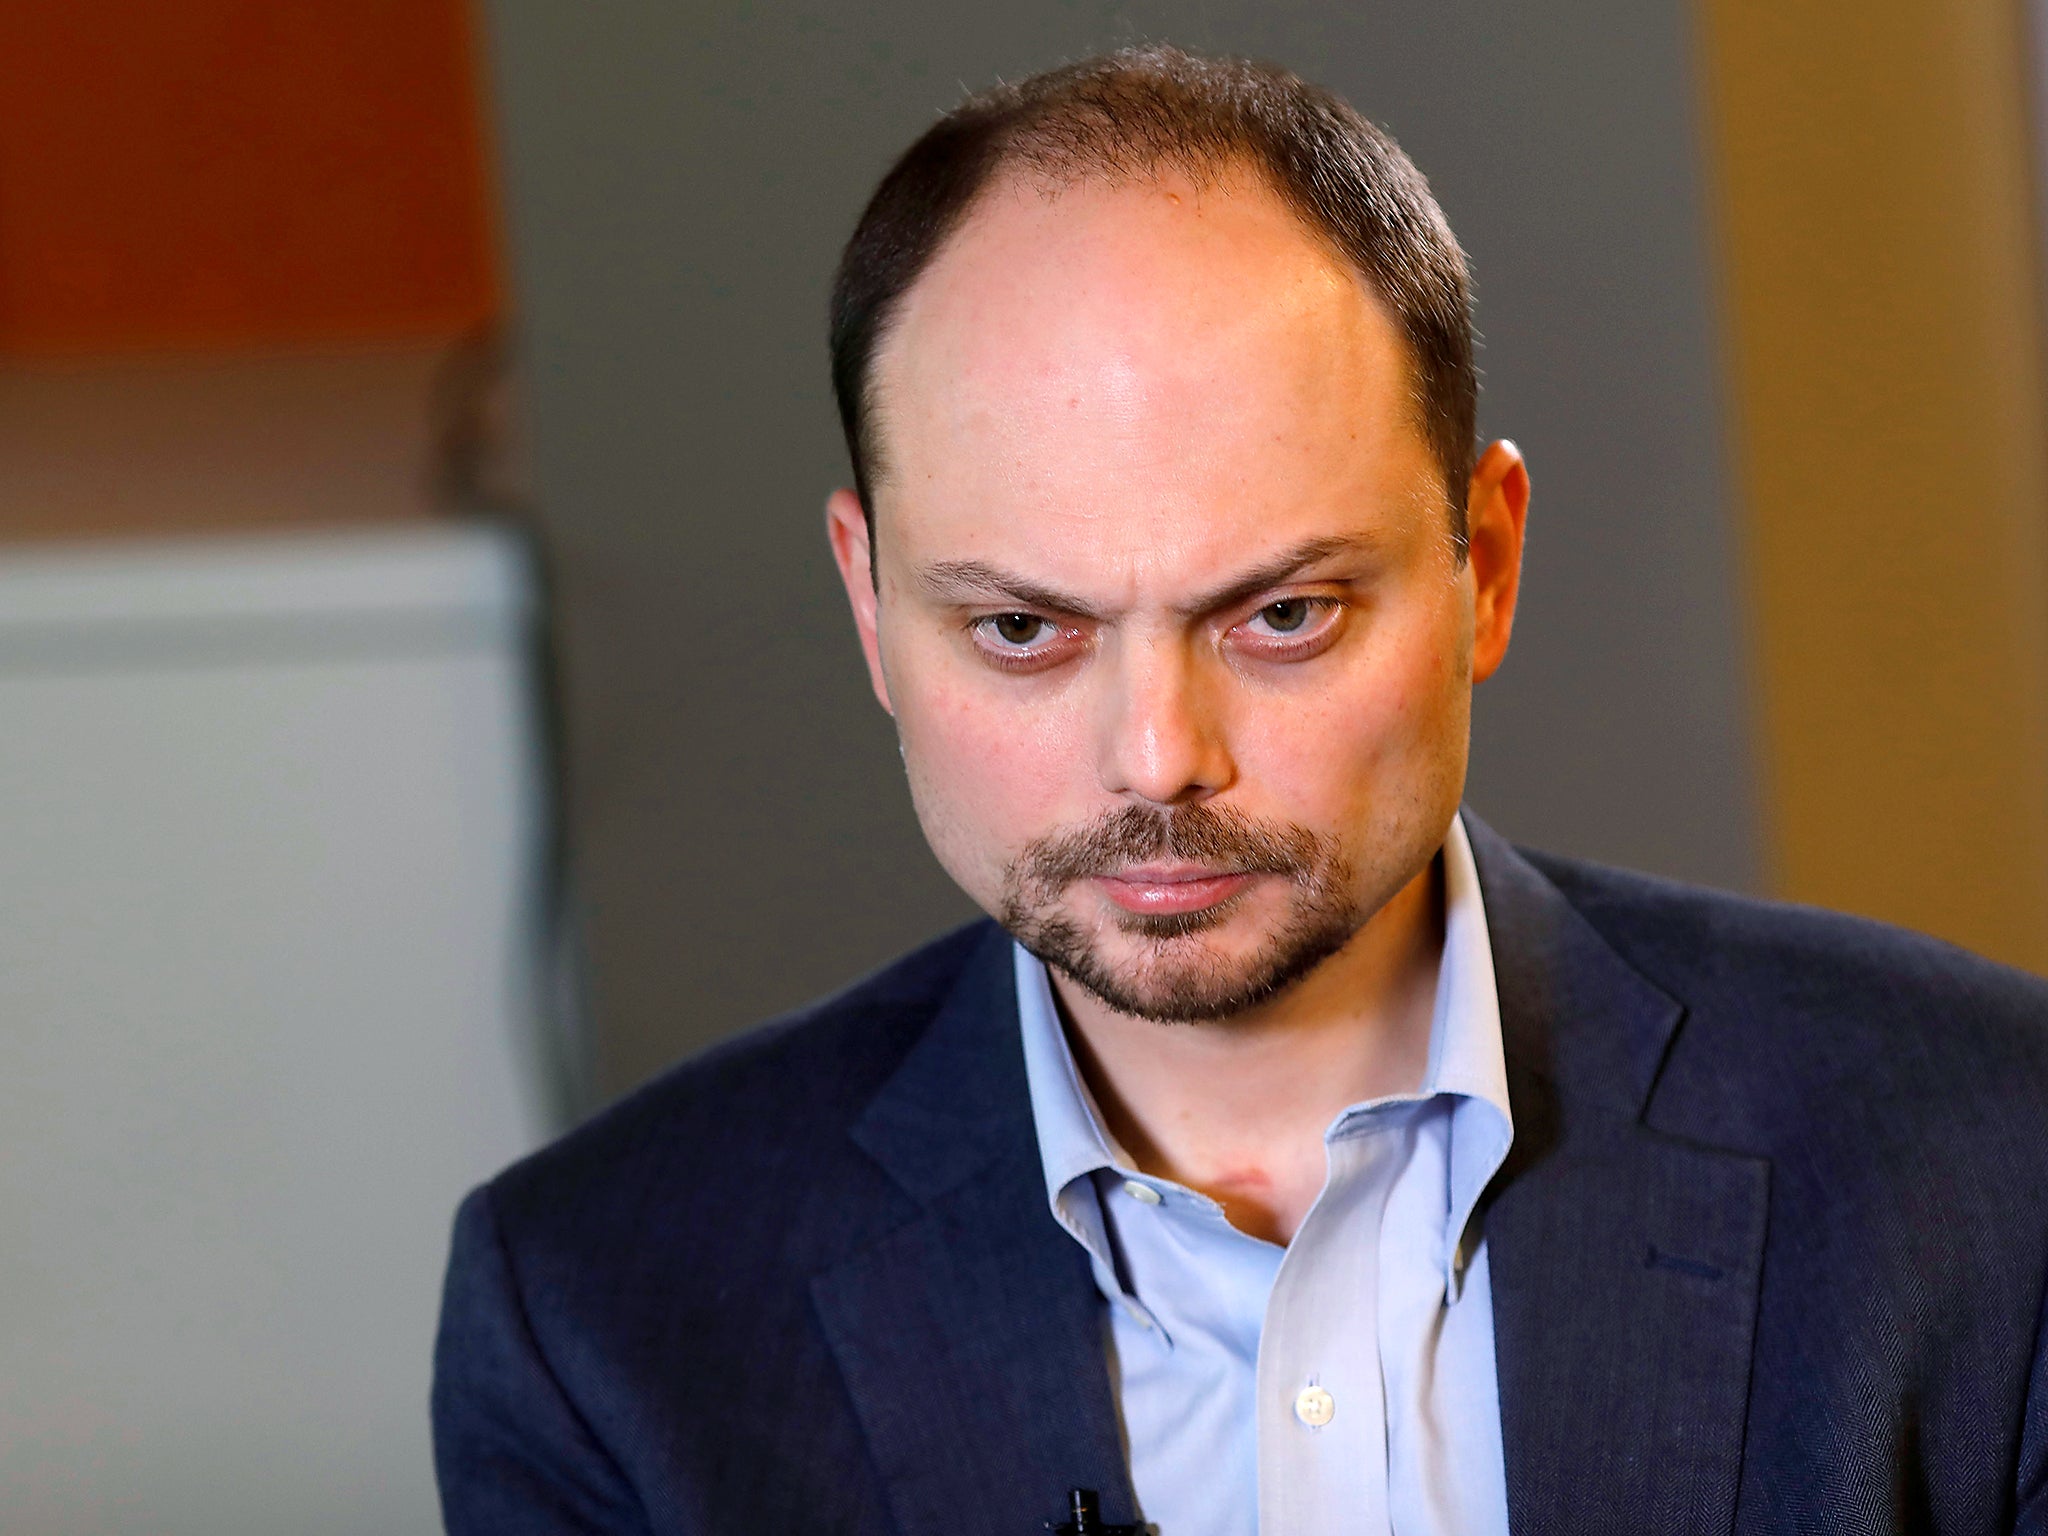 Vladimir Kara-Murza, a twice-poisoned Russian dissident, says: 'If it happens a third time, that'll be it' - The Independent